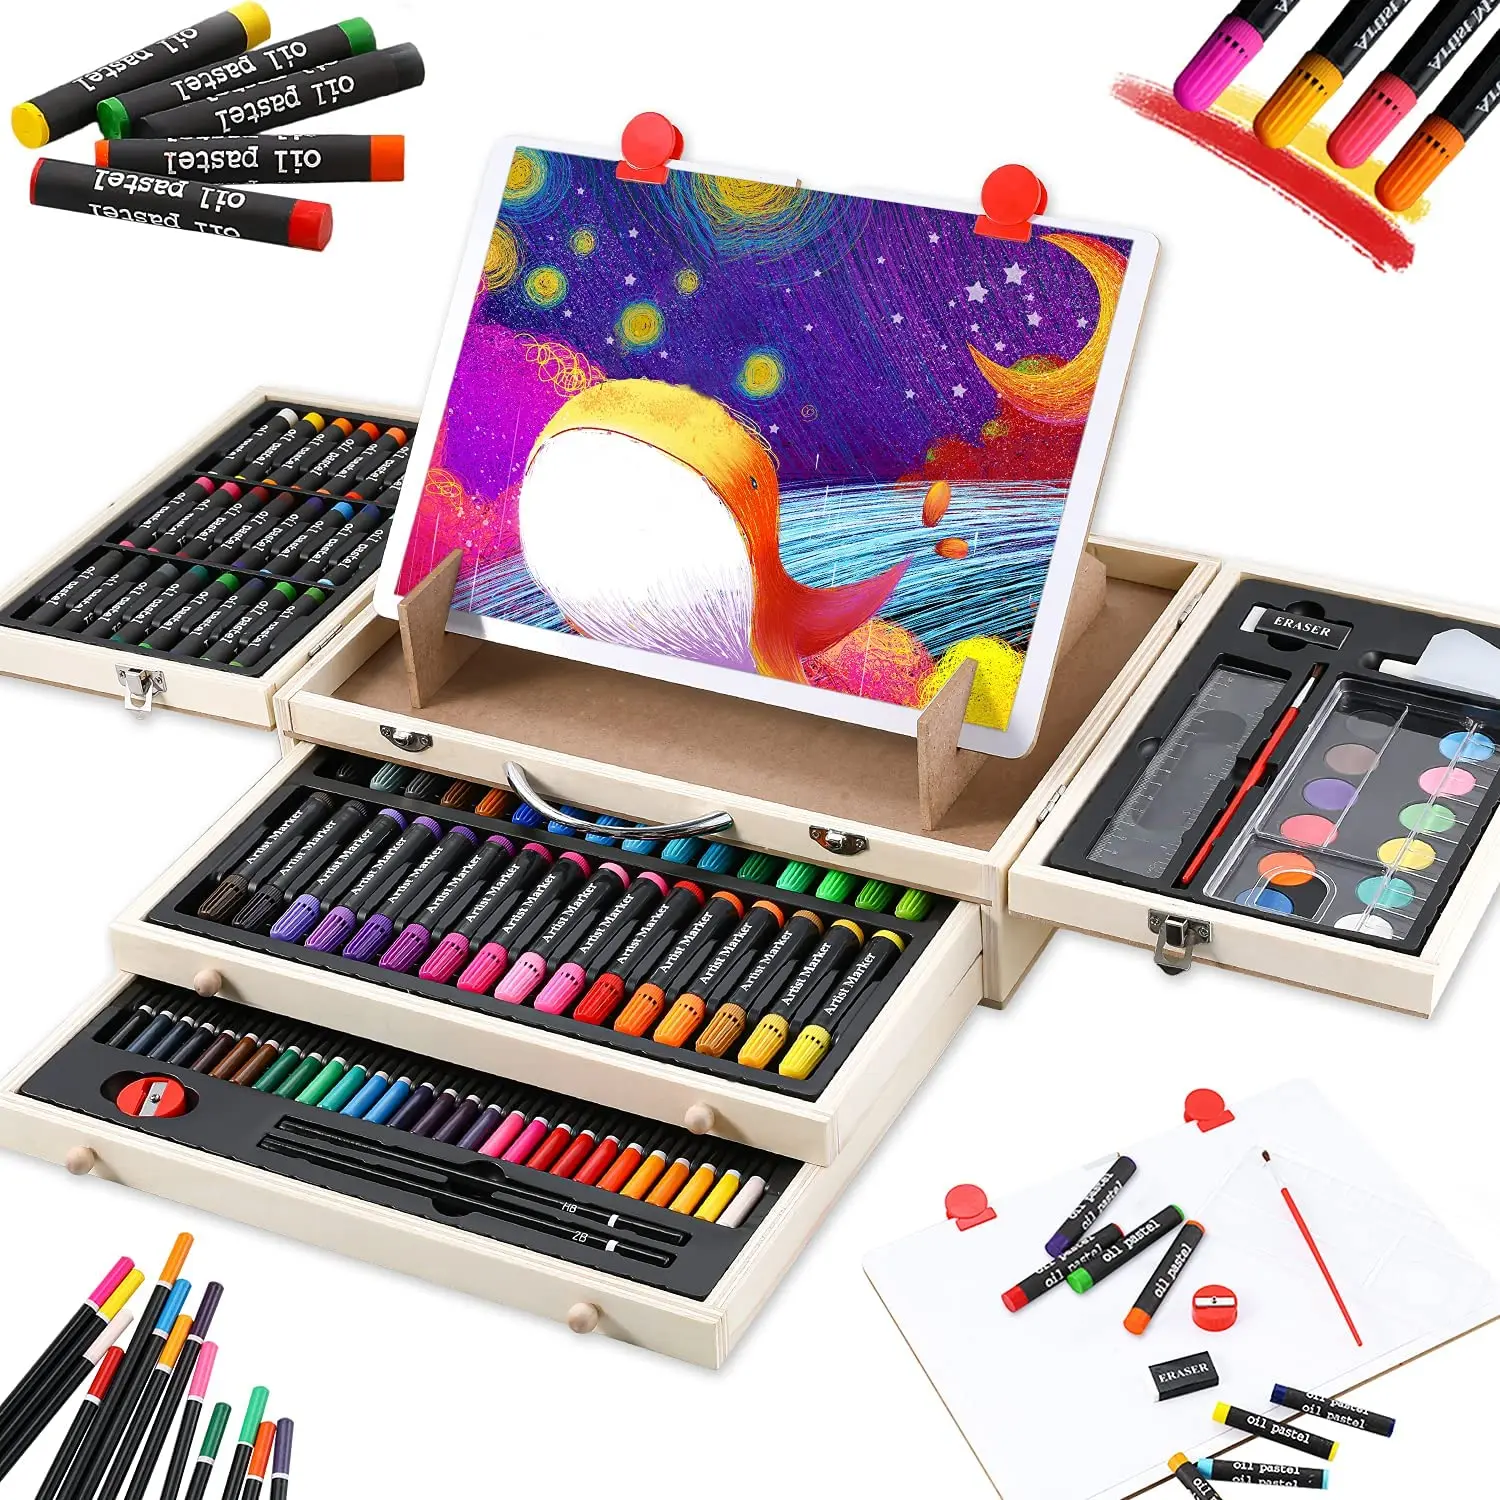 108 Piece Wooden Art Set Crafts Kit With Drawing Easel For Kids Teens ...